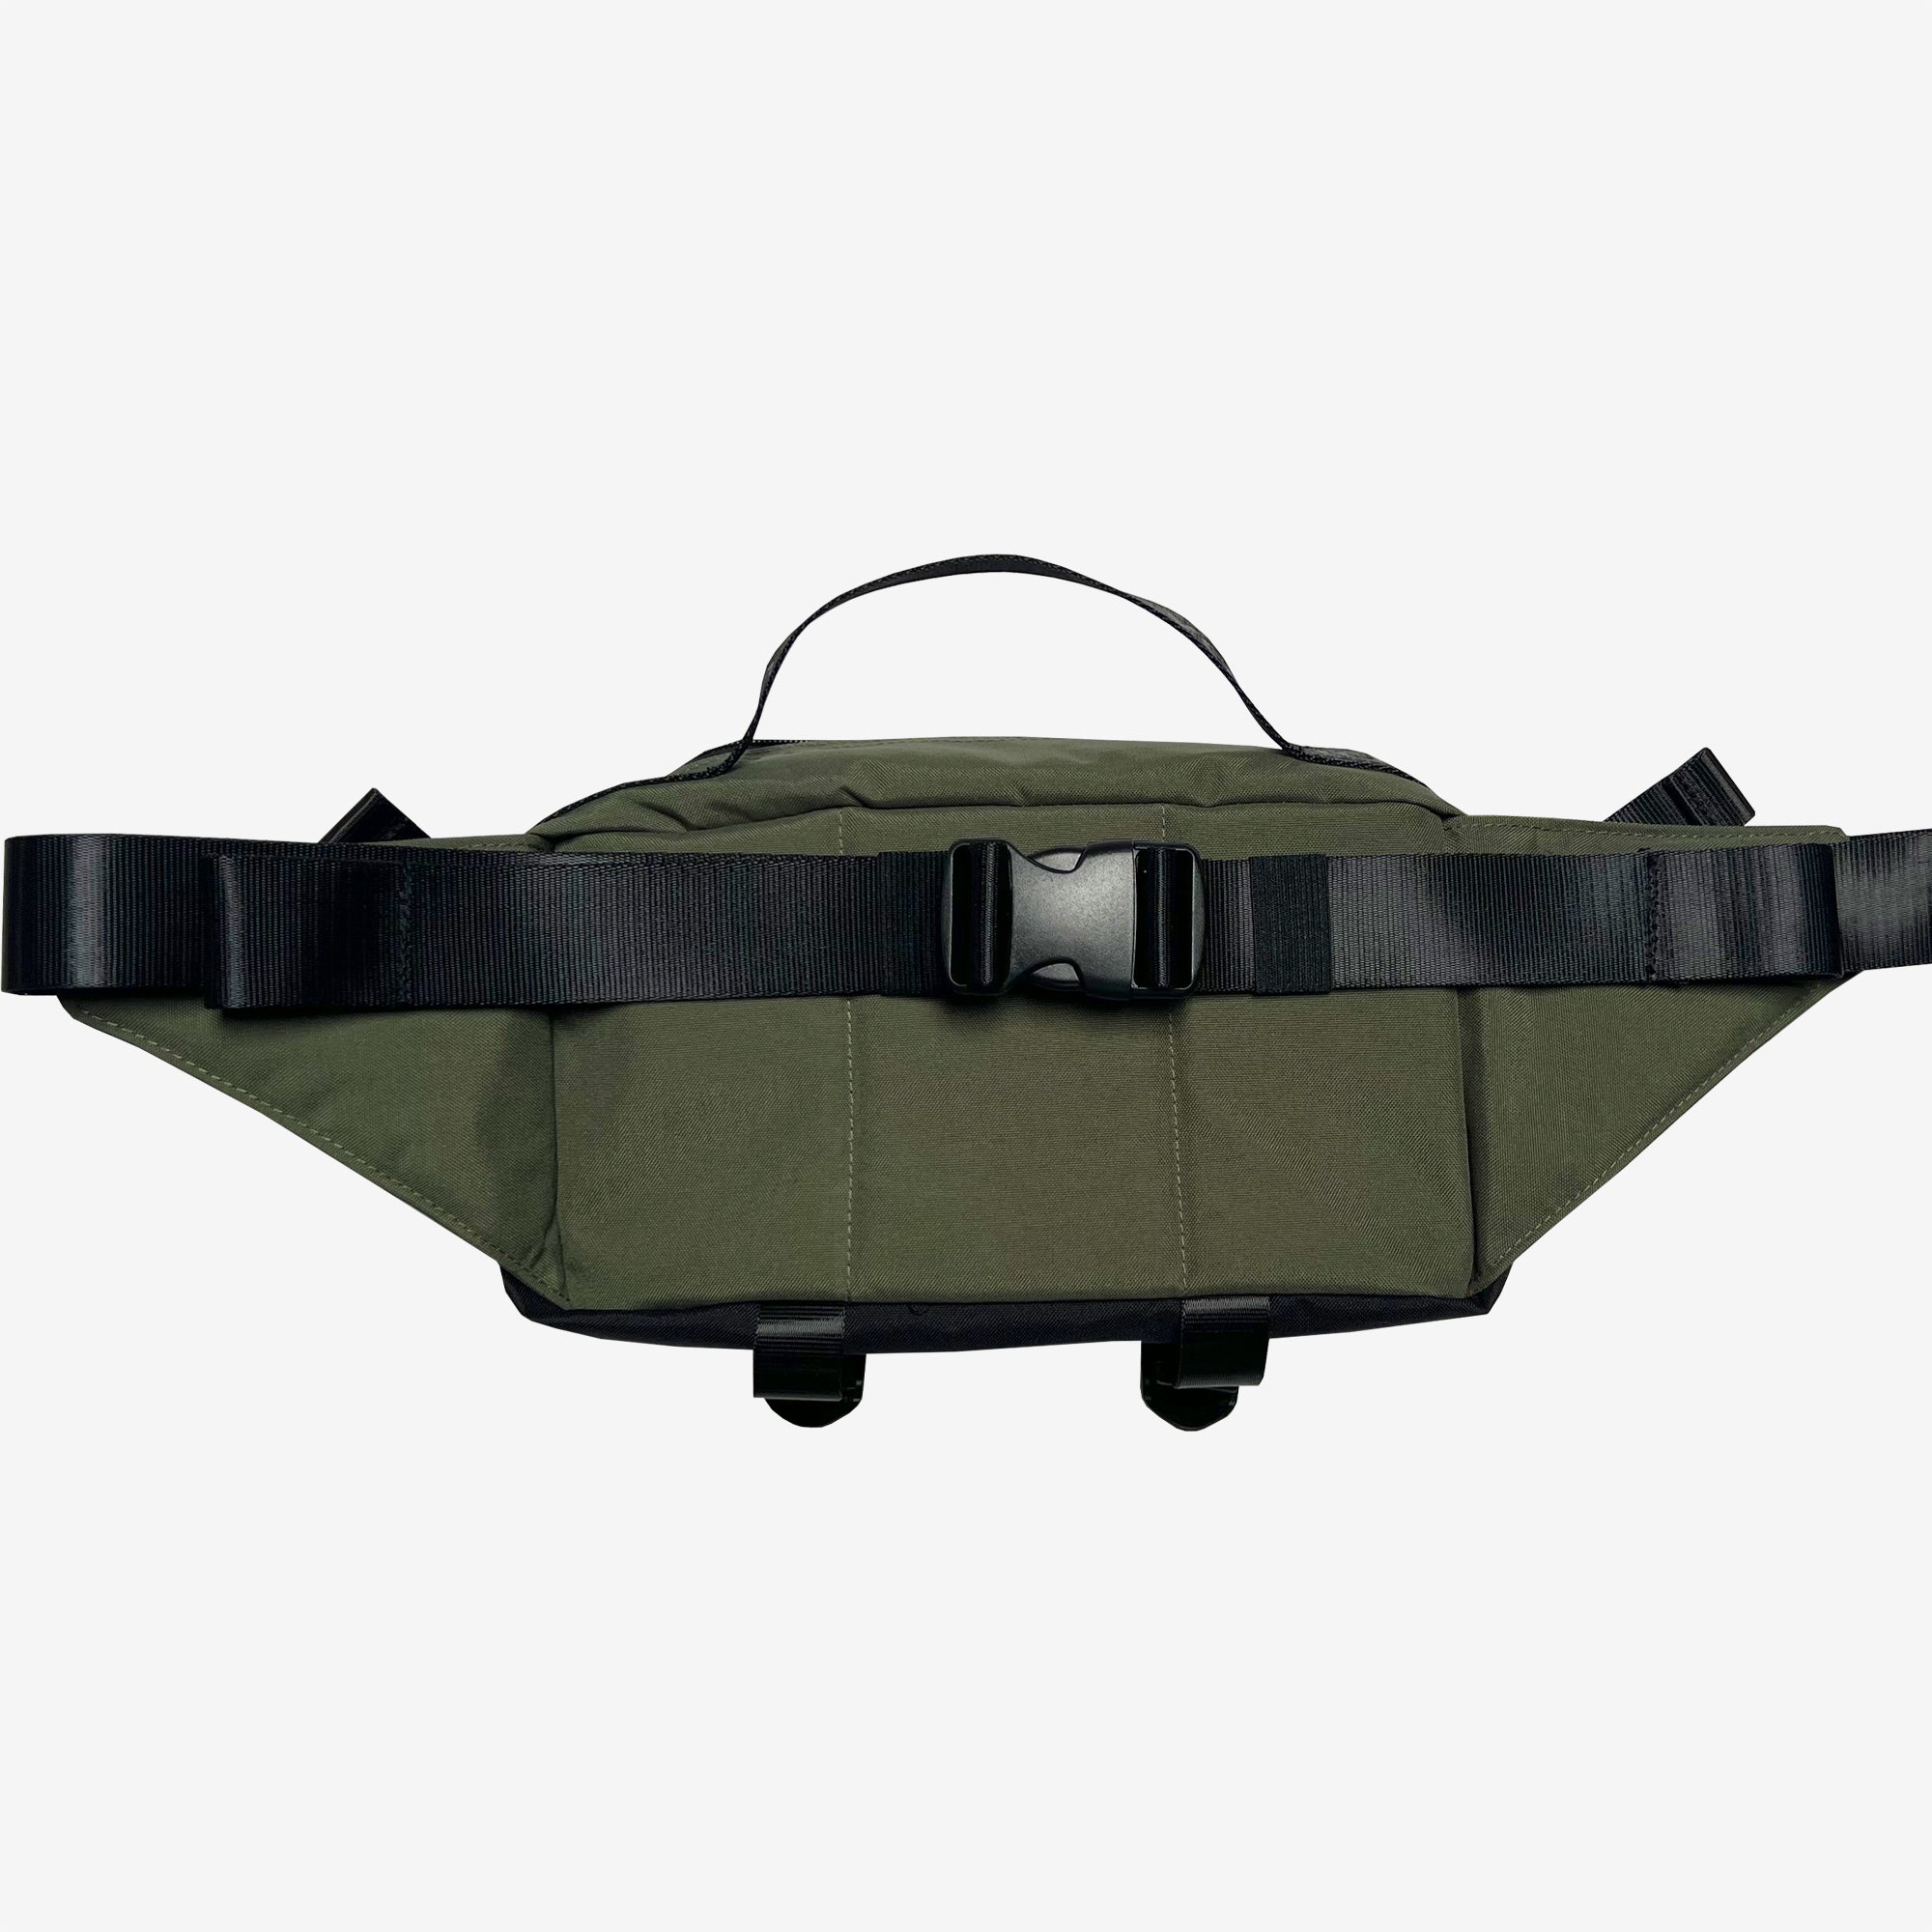 The backside of green nylon hip bag with black waist belt and top handle.